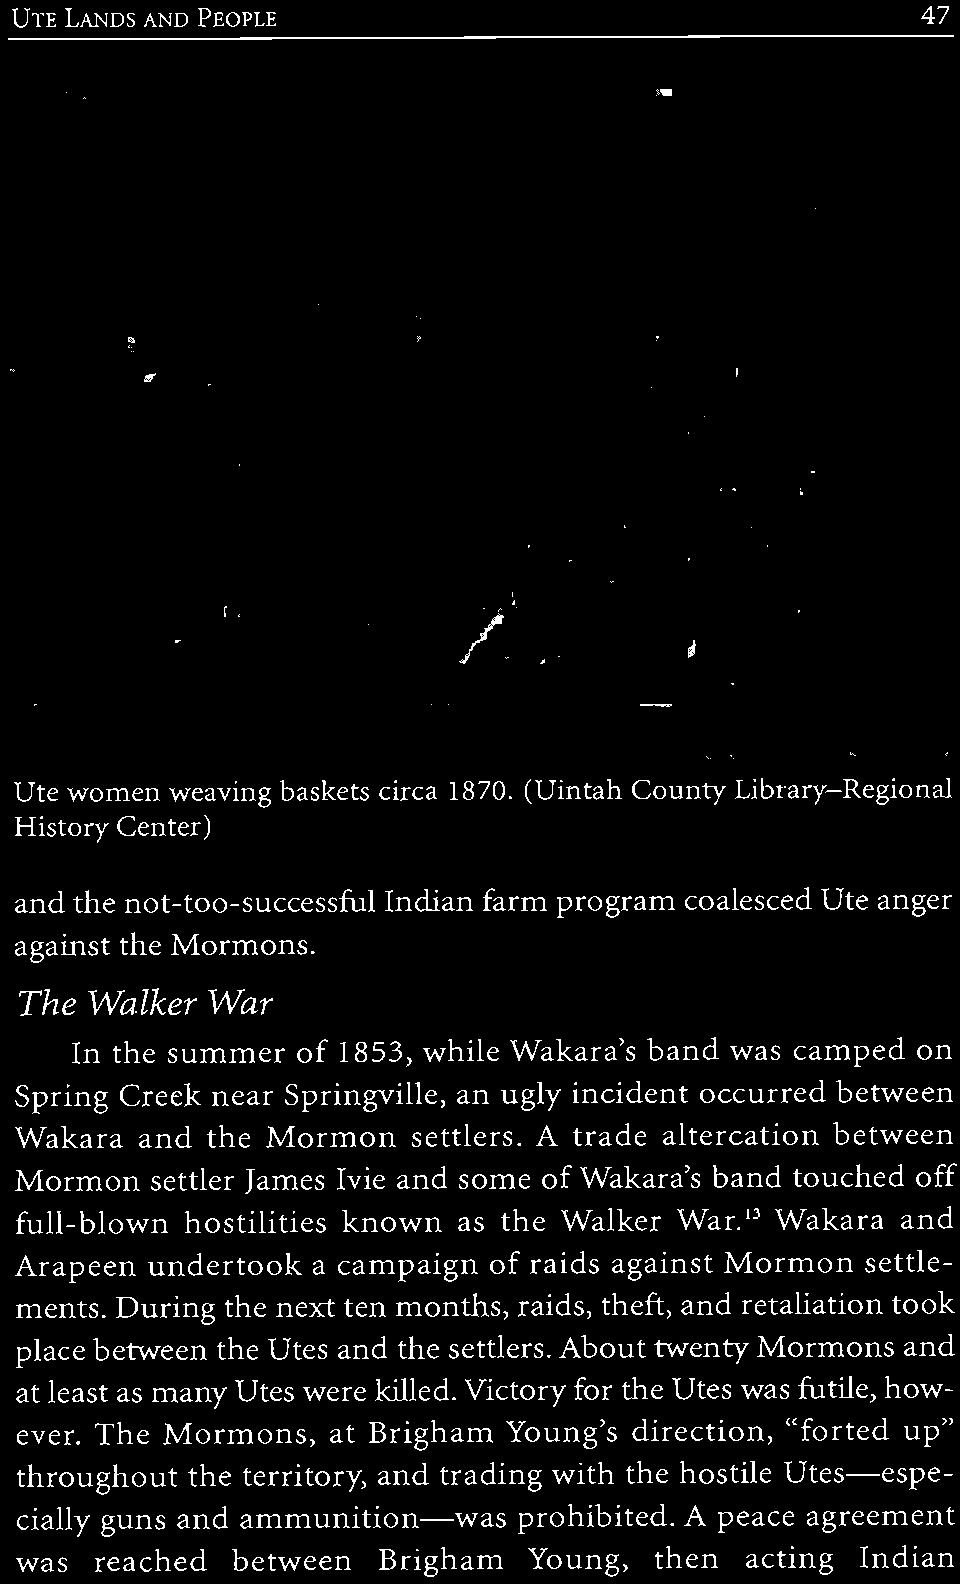 A trade altercation between Mormon settler James Ivie and some of Wakara's band touched off full-blown hostilities known as the Walker War.